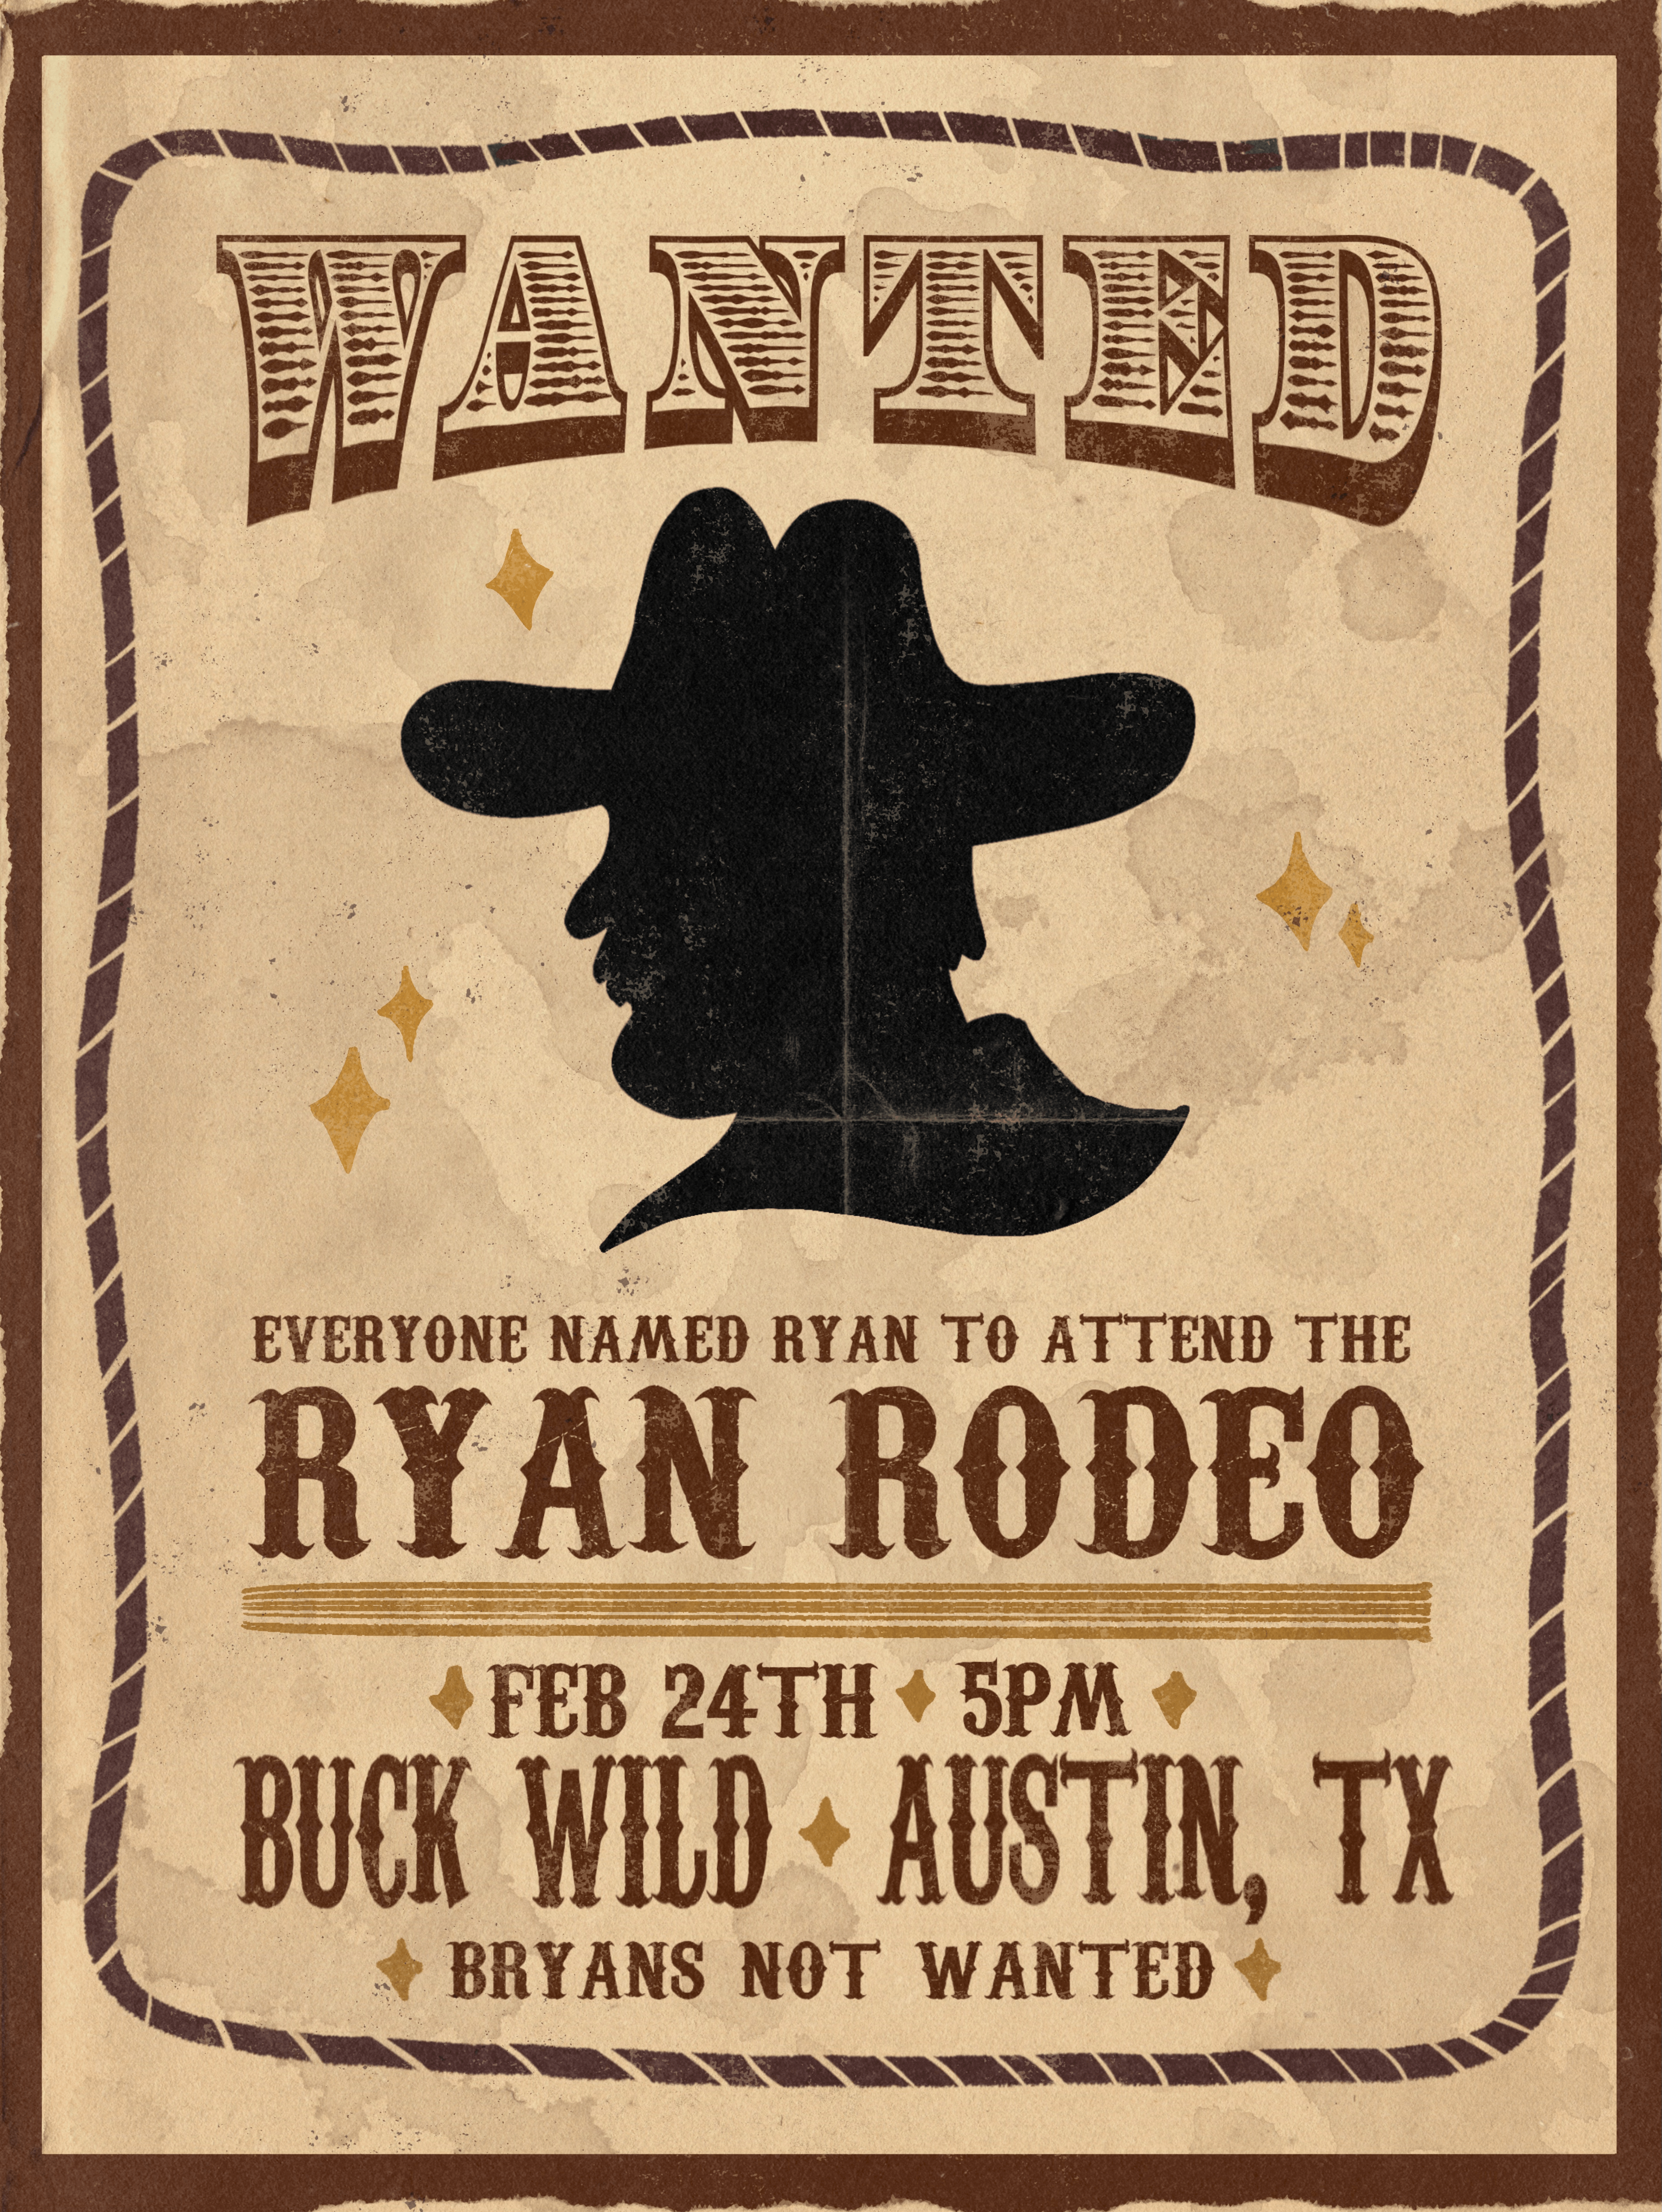 'Ryan Rodeo' aims to gather record-breaking number of Ryans